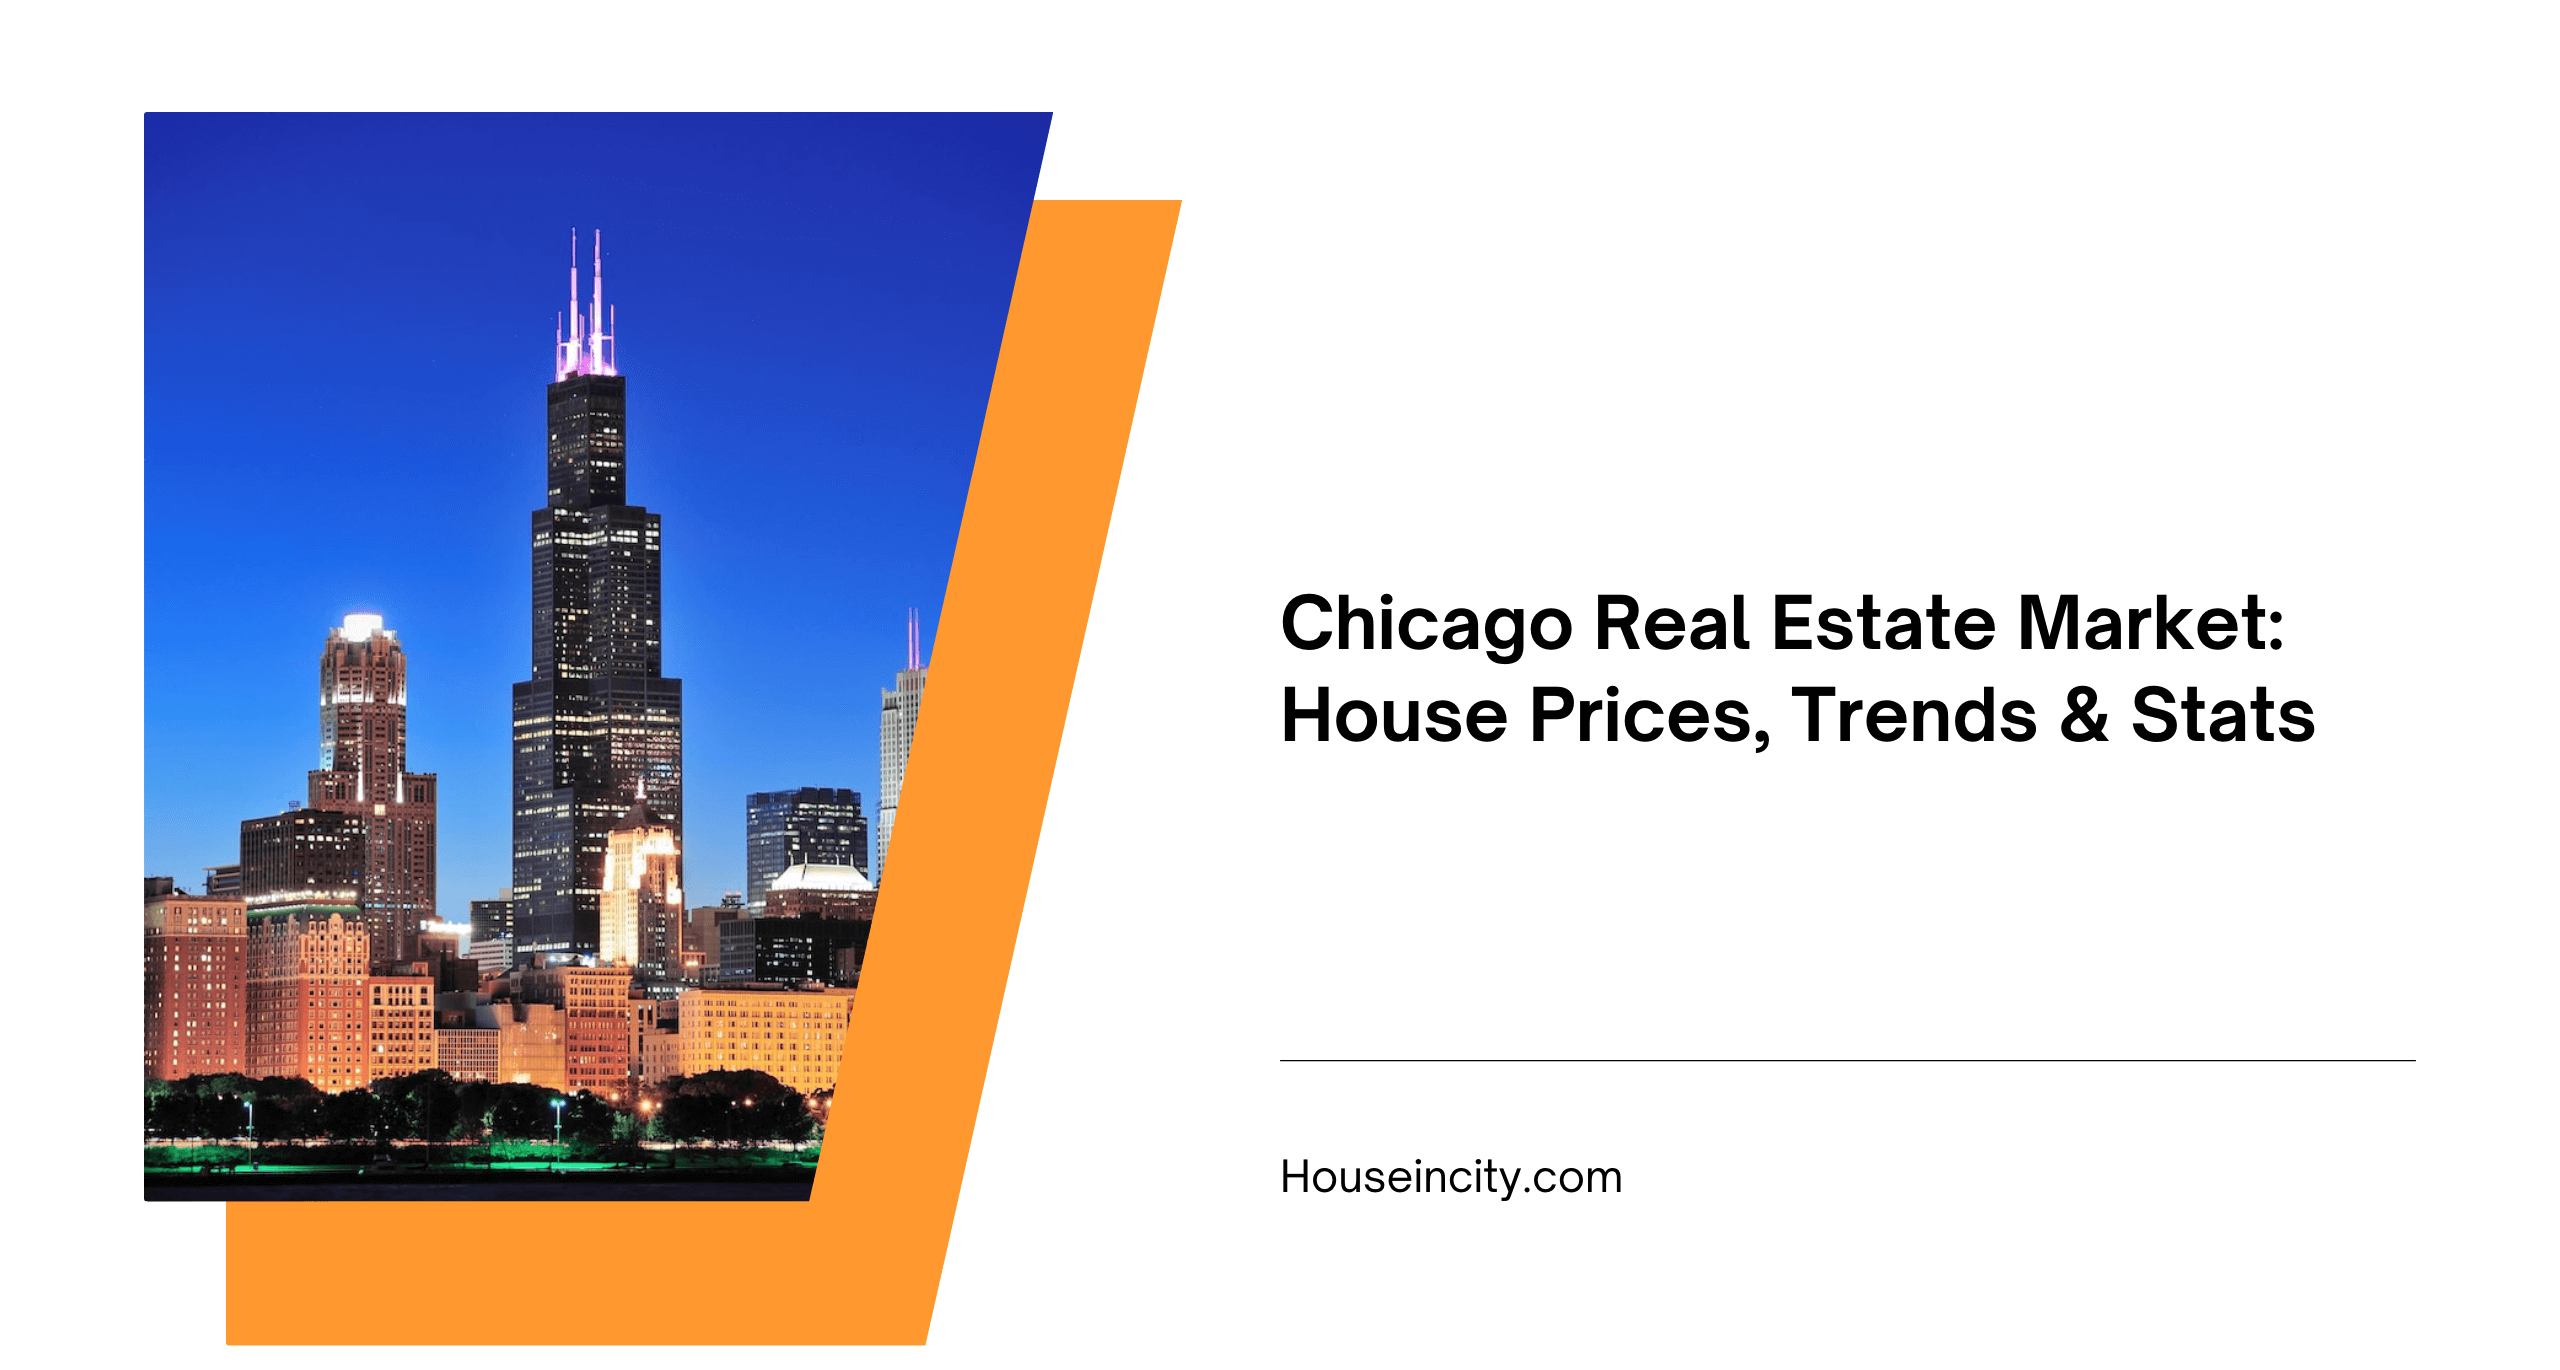 Chicago Real Estate Market: House Prices, Trends & Stats